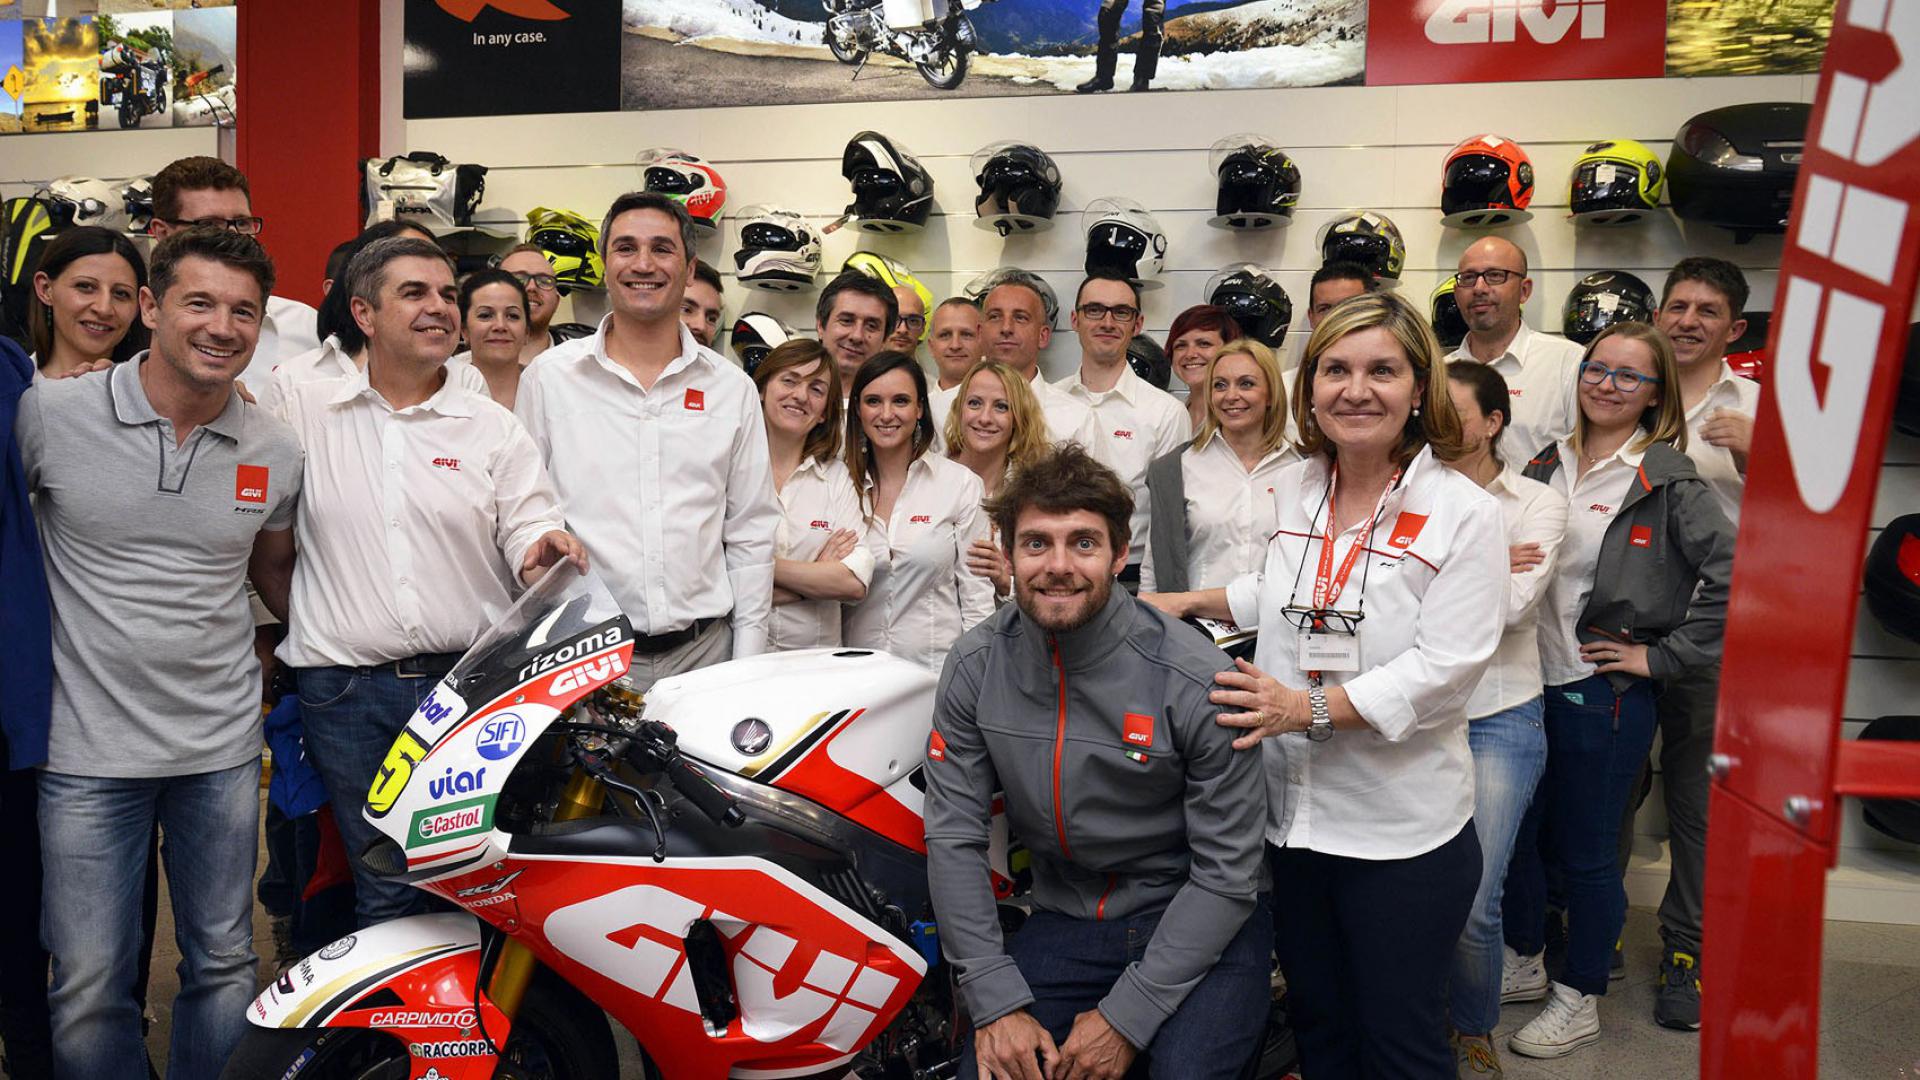 GIVI+and+LCR+Honda+celebrate+250+races+together